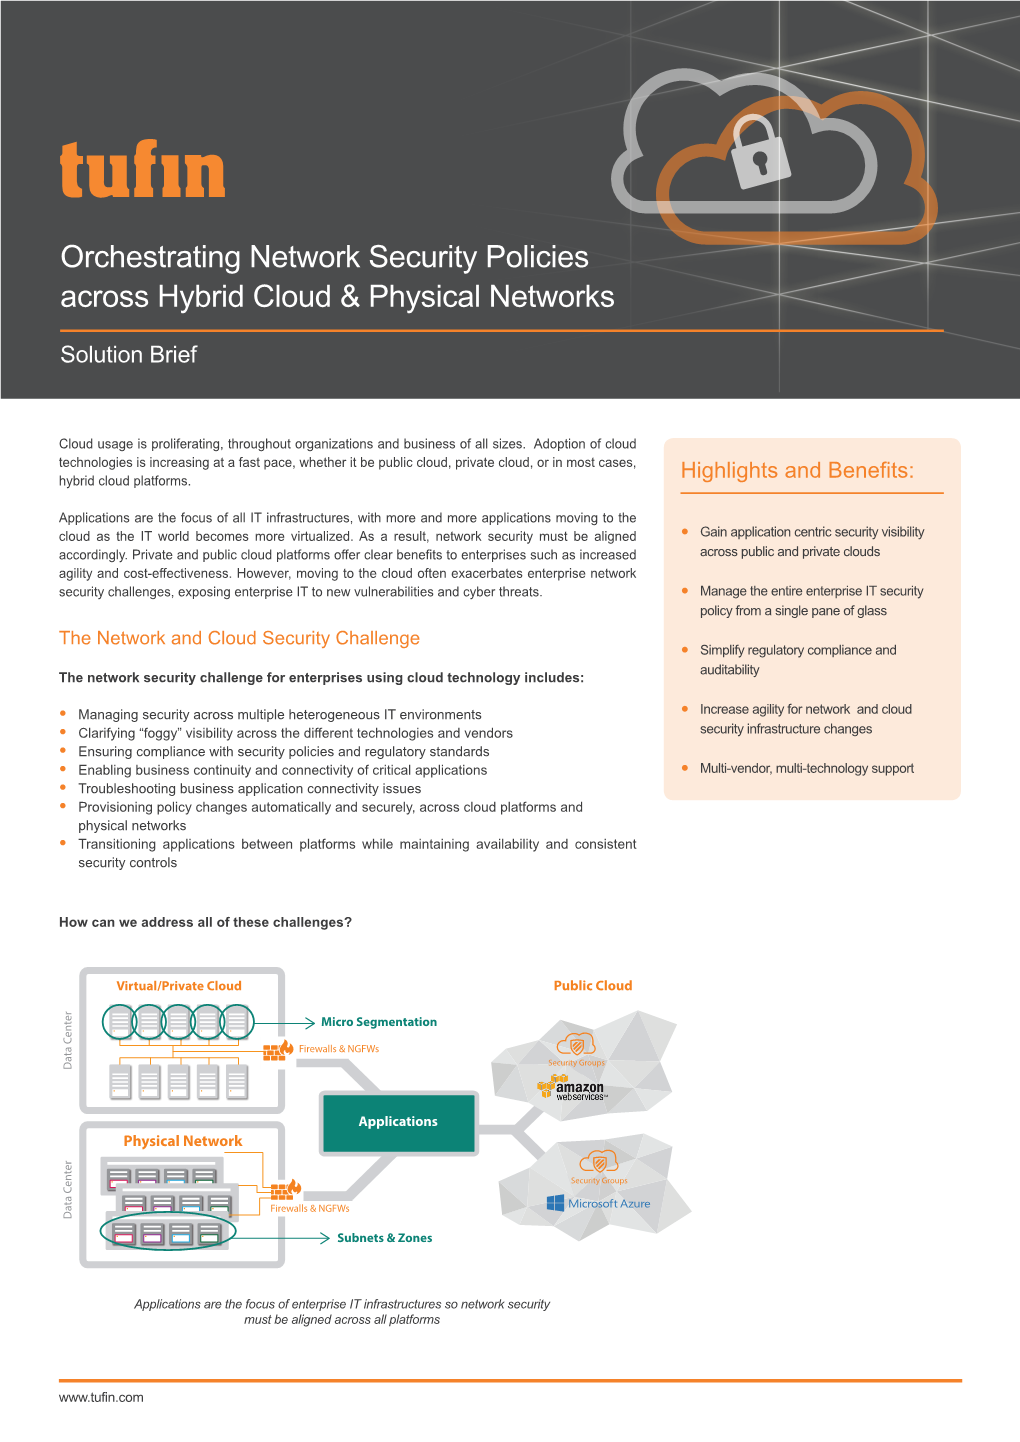 Orchestrating Network Security Policies Across Hybrid Cloud & Physical Networks